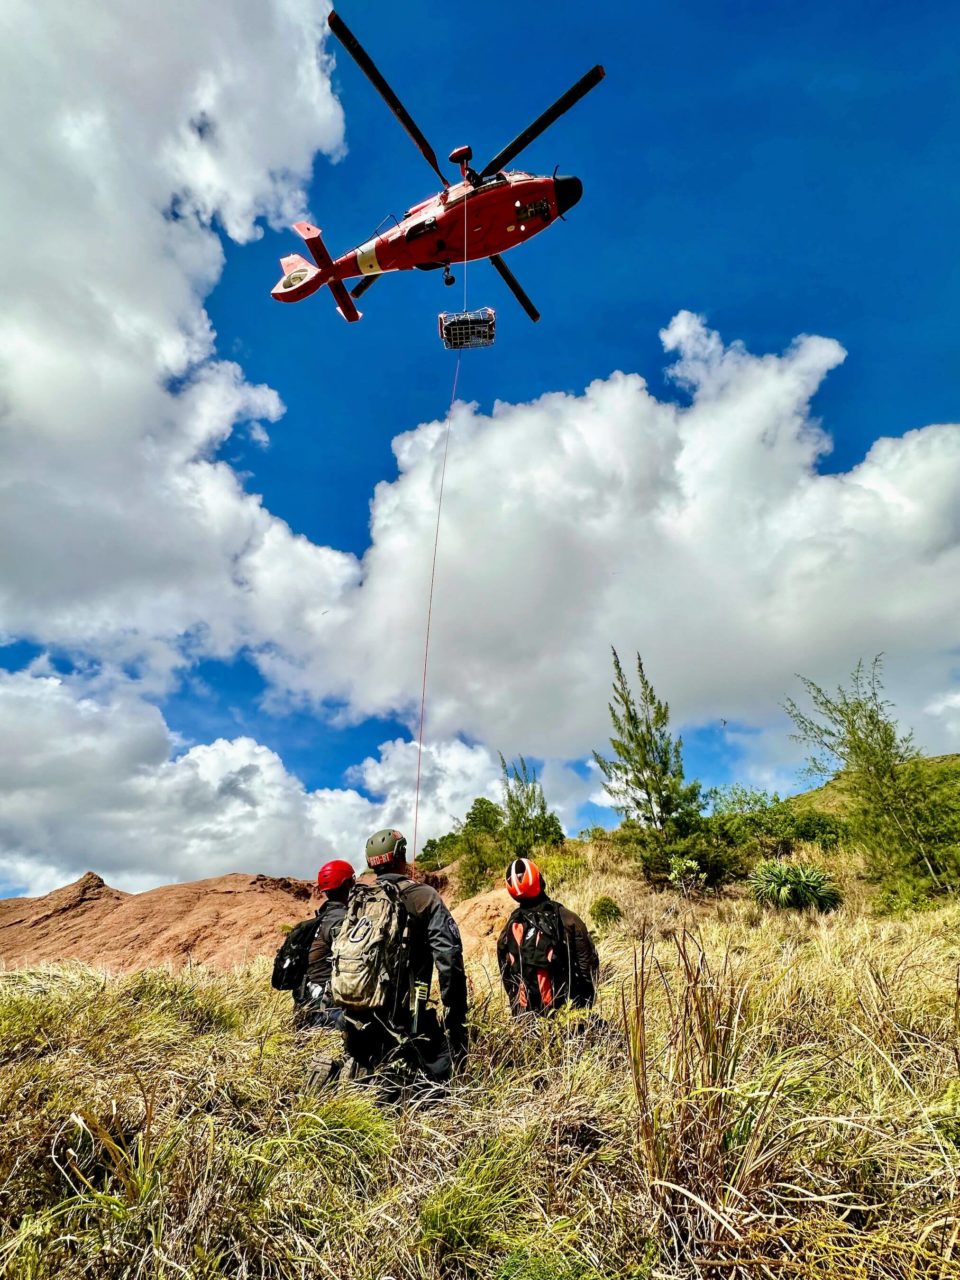 Guam Fire Department and U.S. Coast Guard members conduct rescue hoist training at Sella Bay Overlook in Guam on March 8, 2023. The exercise allowed the crews to assess the procedures each agency is familiar with and practice hoisting a rescue basket and a rescue swimmer from the aircraft. For the aircrew, it also served as an area familiarization to better understand the terrain and winds common on Guam's southwest coast. (U.S. Coast Guard photo by Petty Officer 2nd Class Ethan Bray)